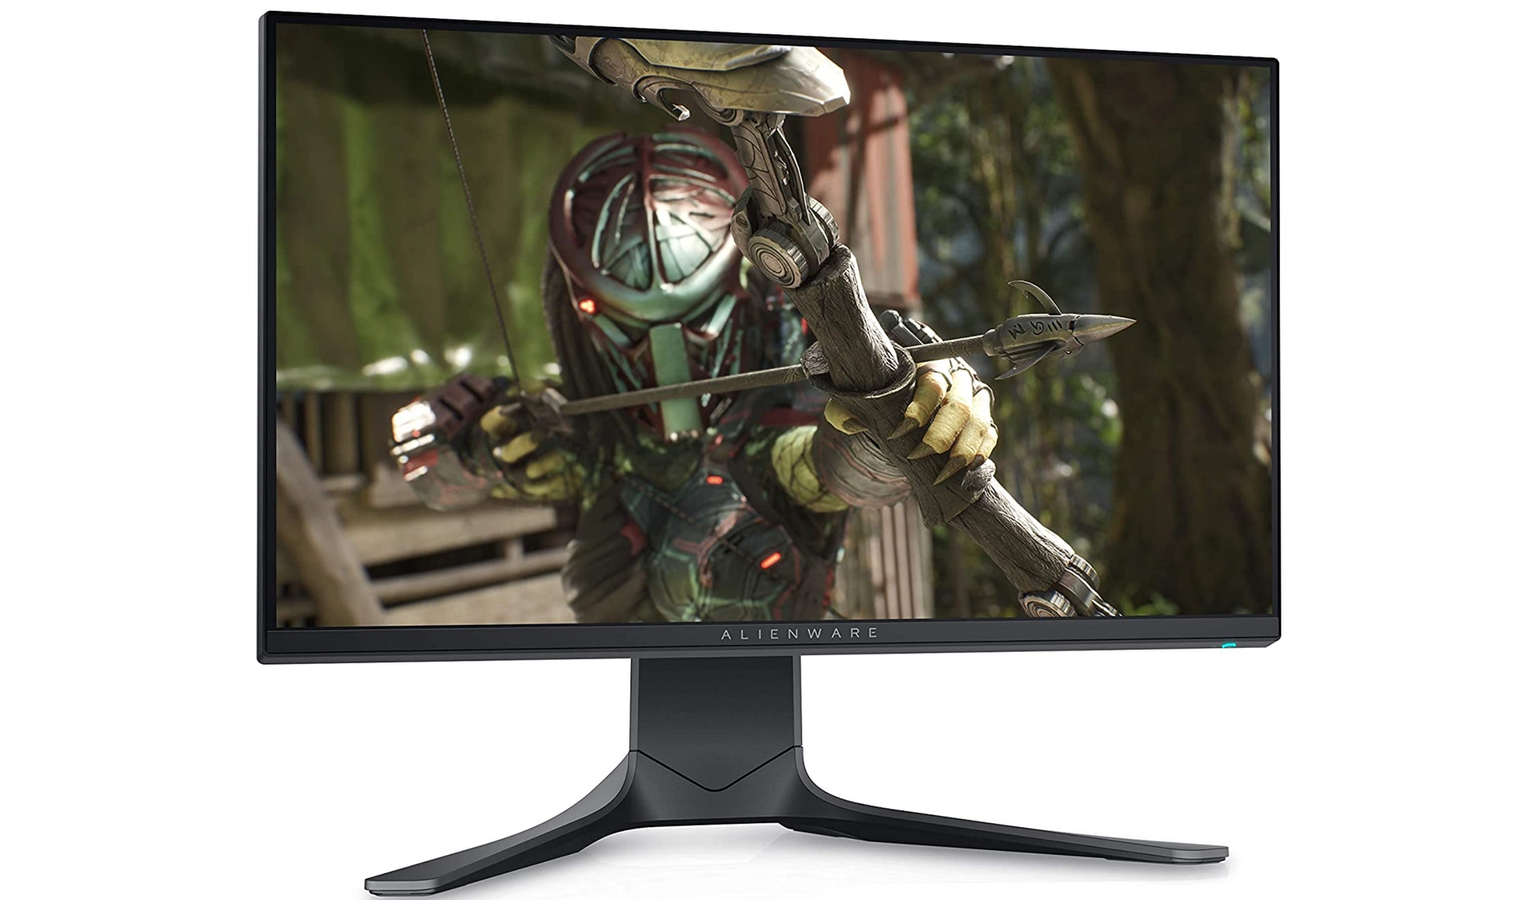 Best gaming monitor for Warzone Alienware product image of a monitor with an alien with a bow and arrow on the display.